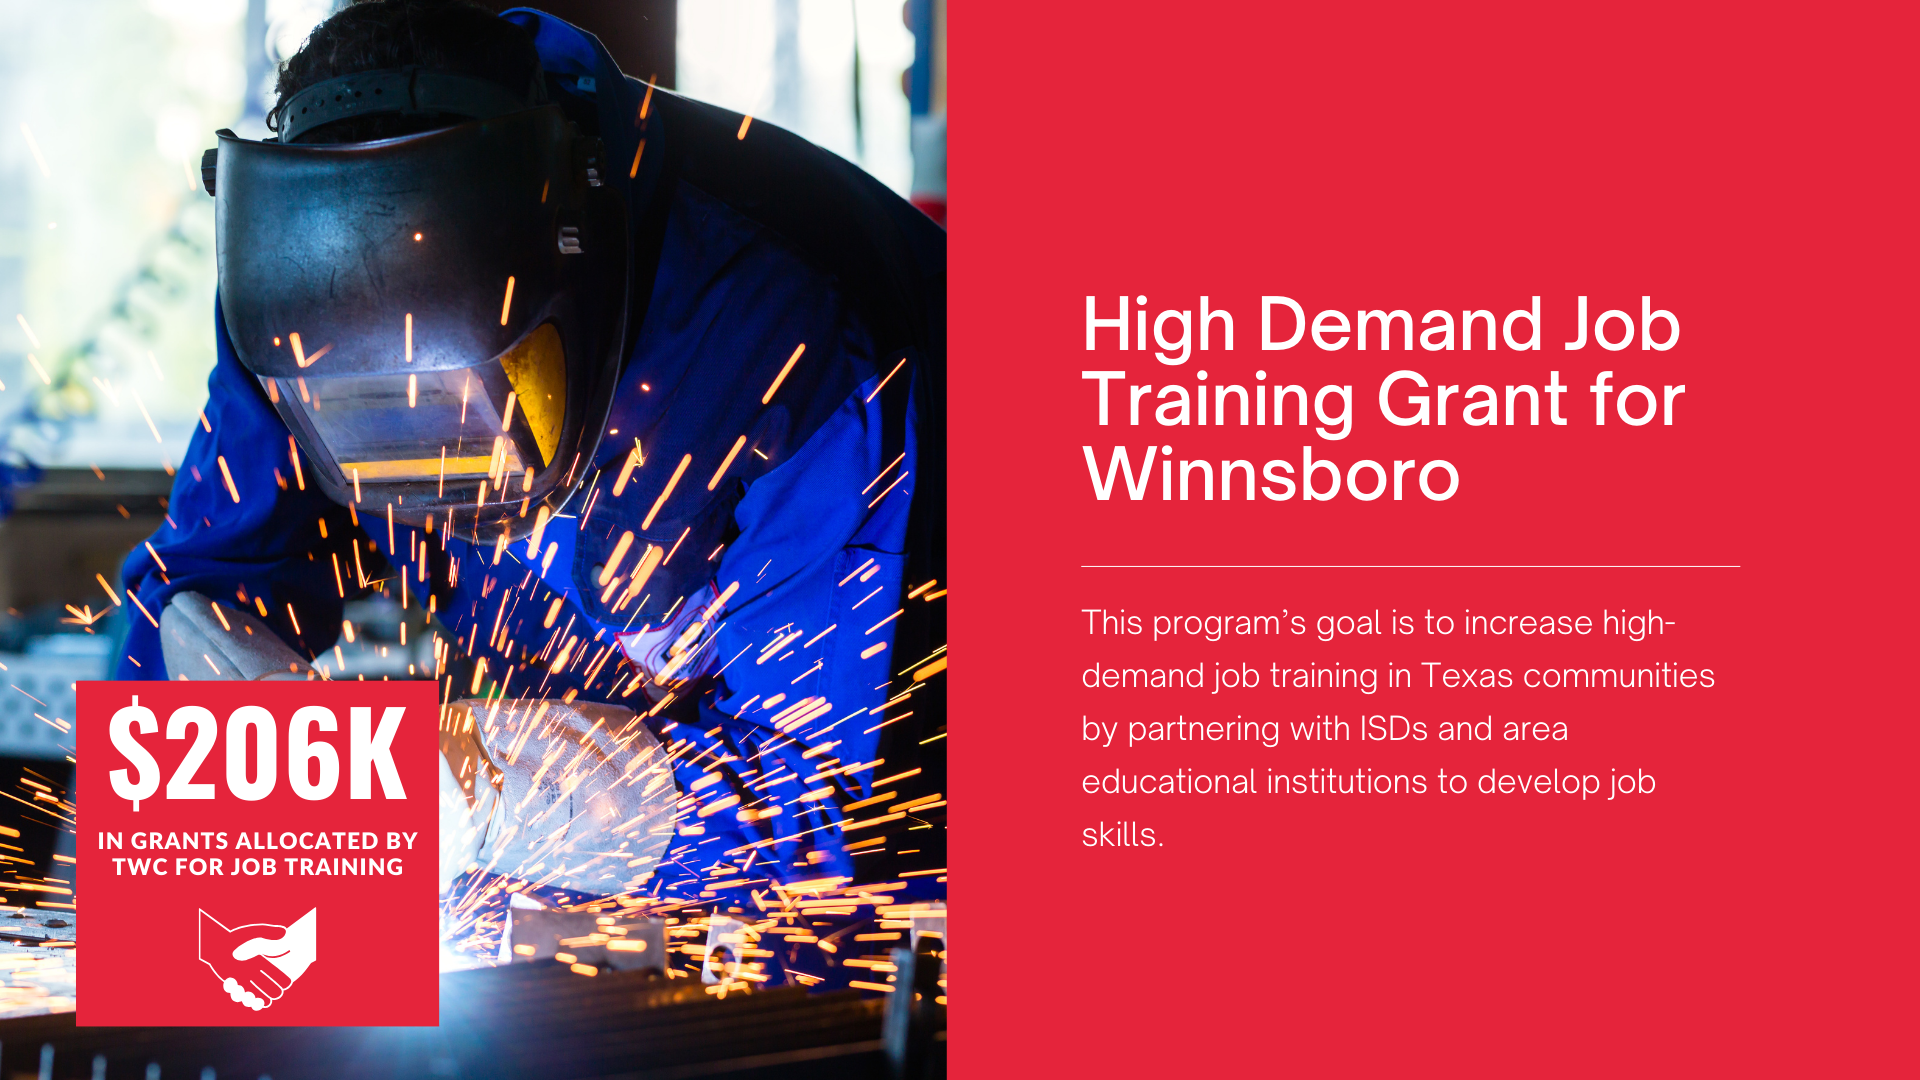 A poster for a high demand job training grant for winnsboro